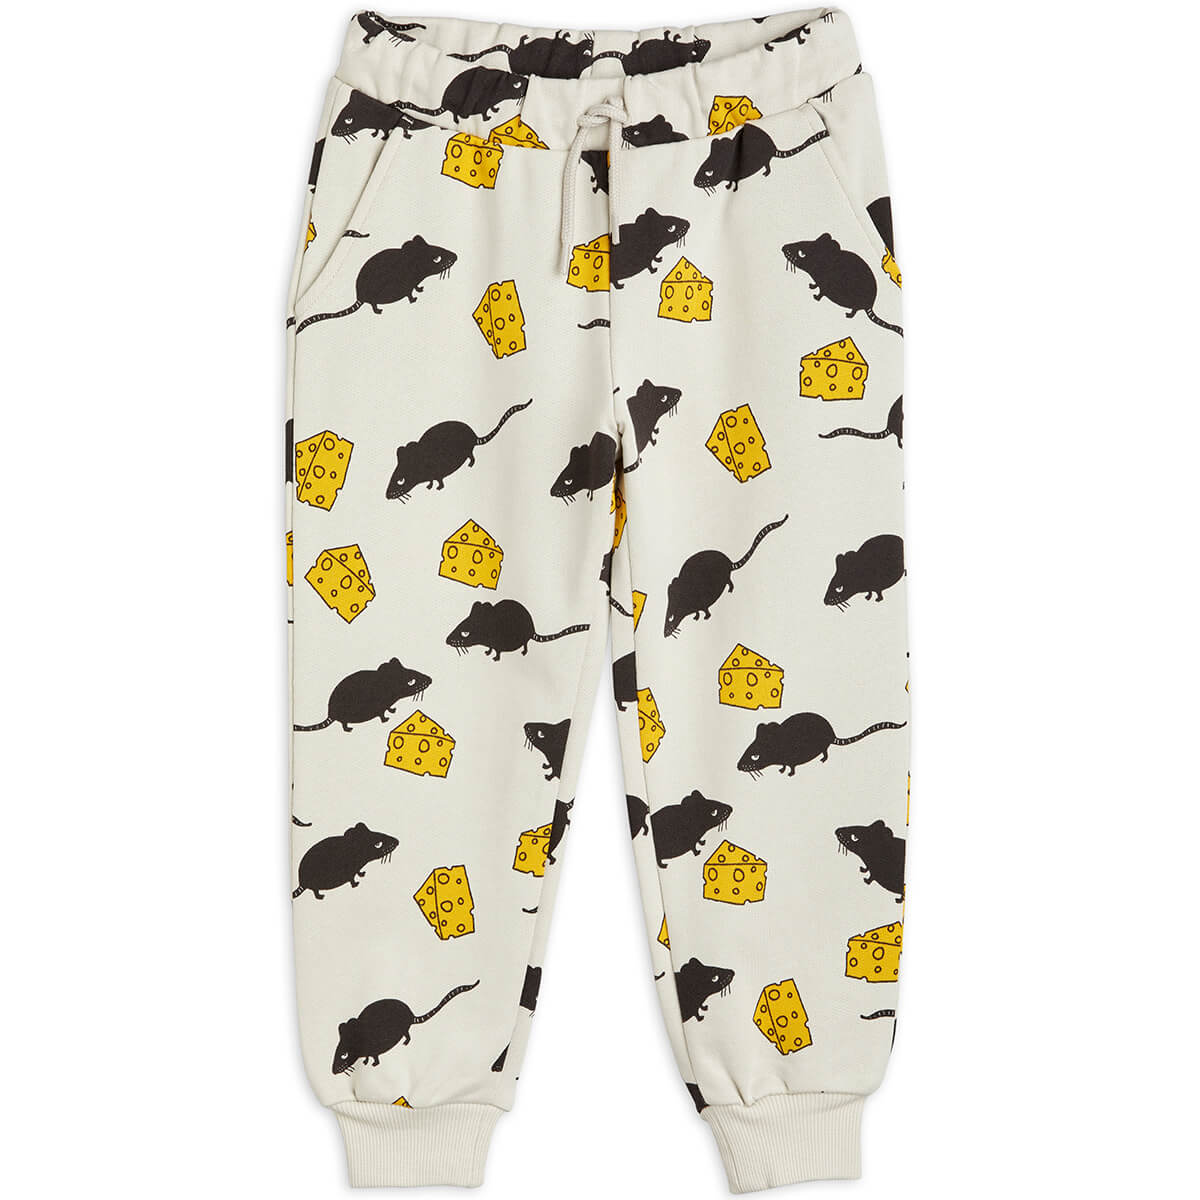 Mouse Sweatpants by Mini Rodini - Last One In Stock - 116/122 (5-7